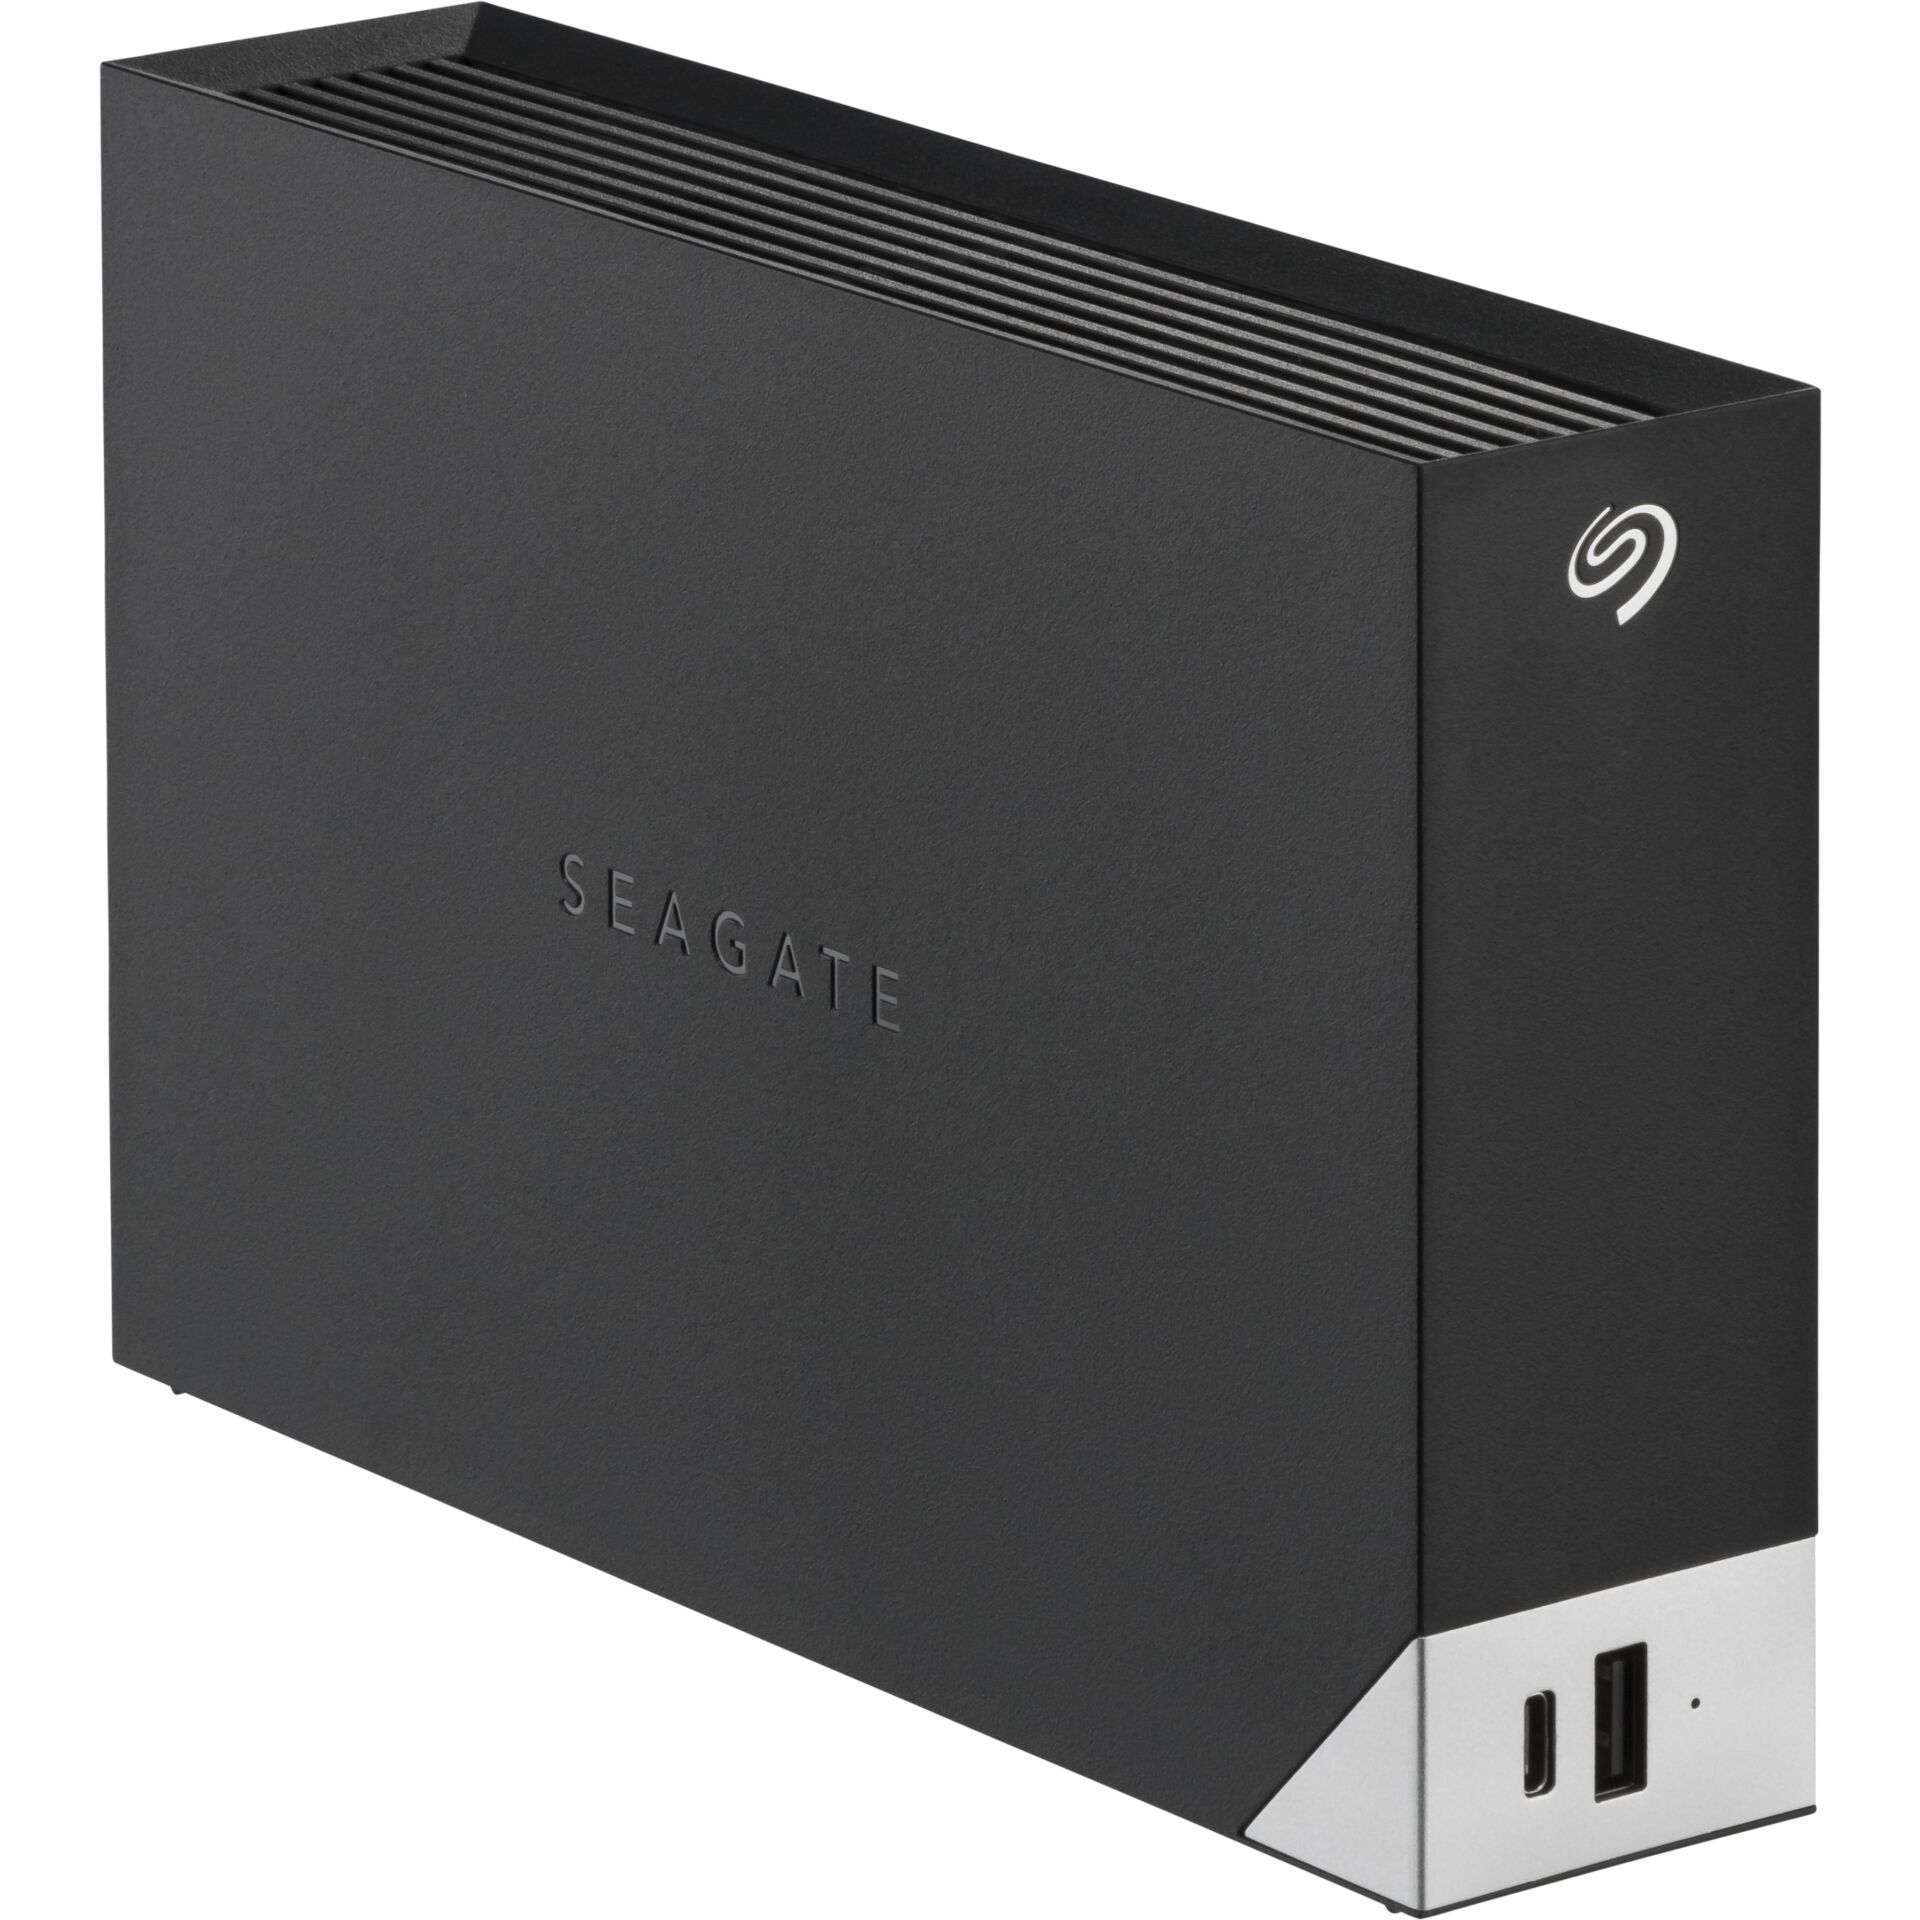 Seagate One Touch with hub Harddisk STLC16000400 16TB USB 3.0